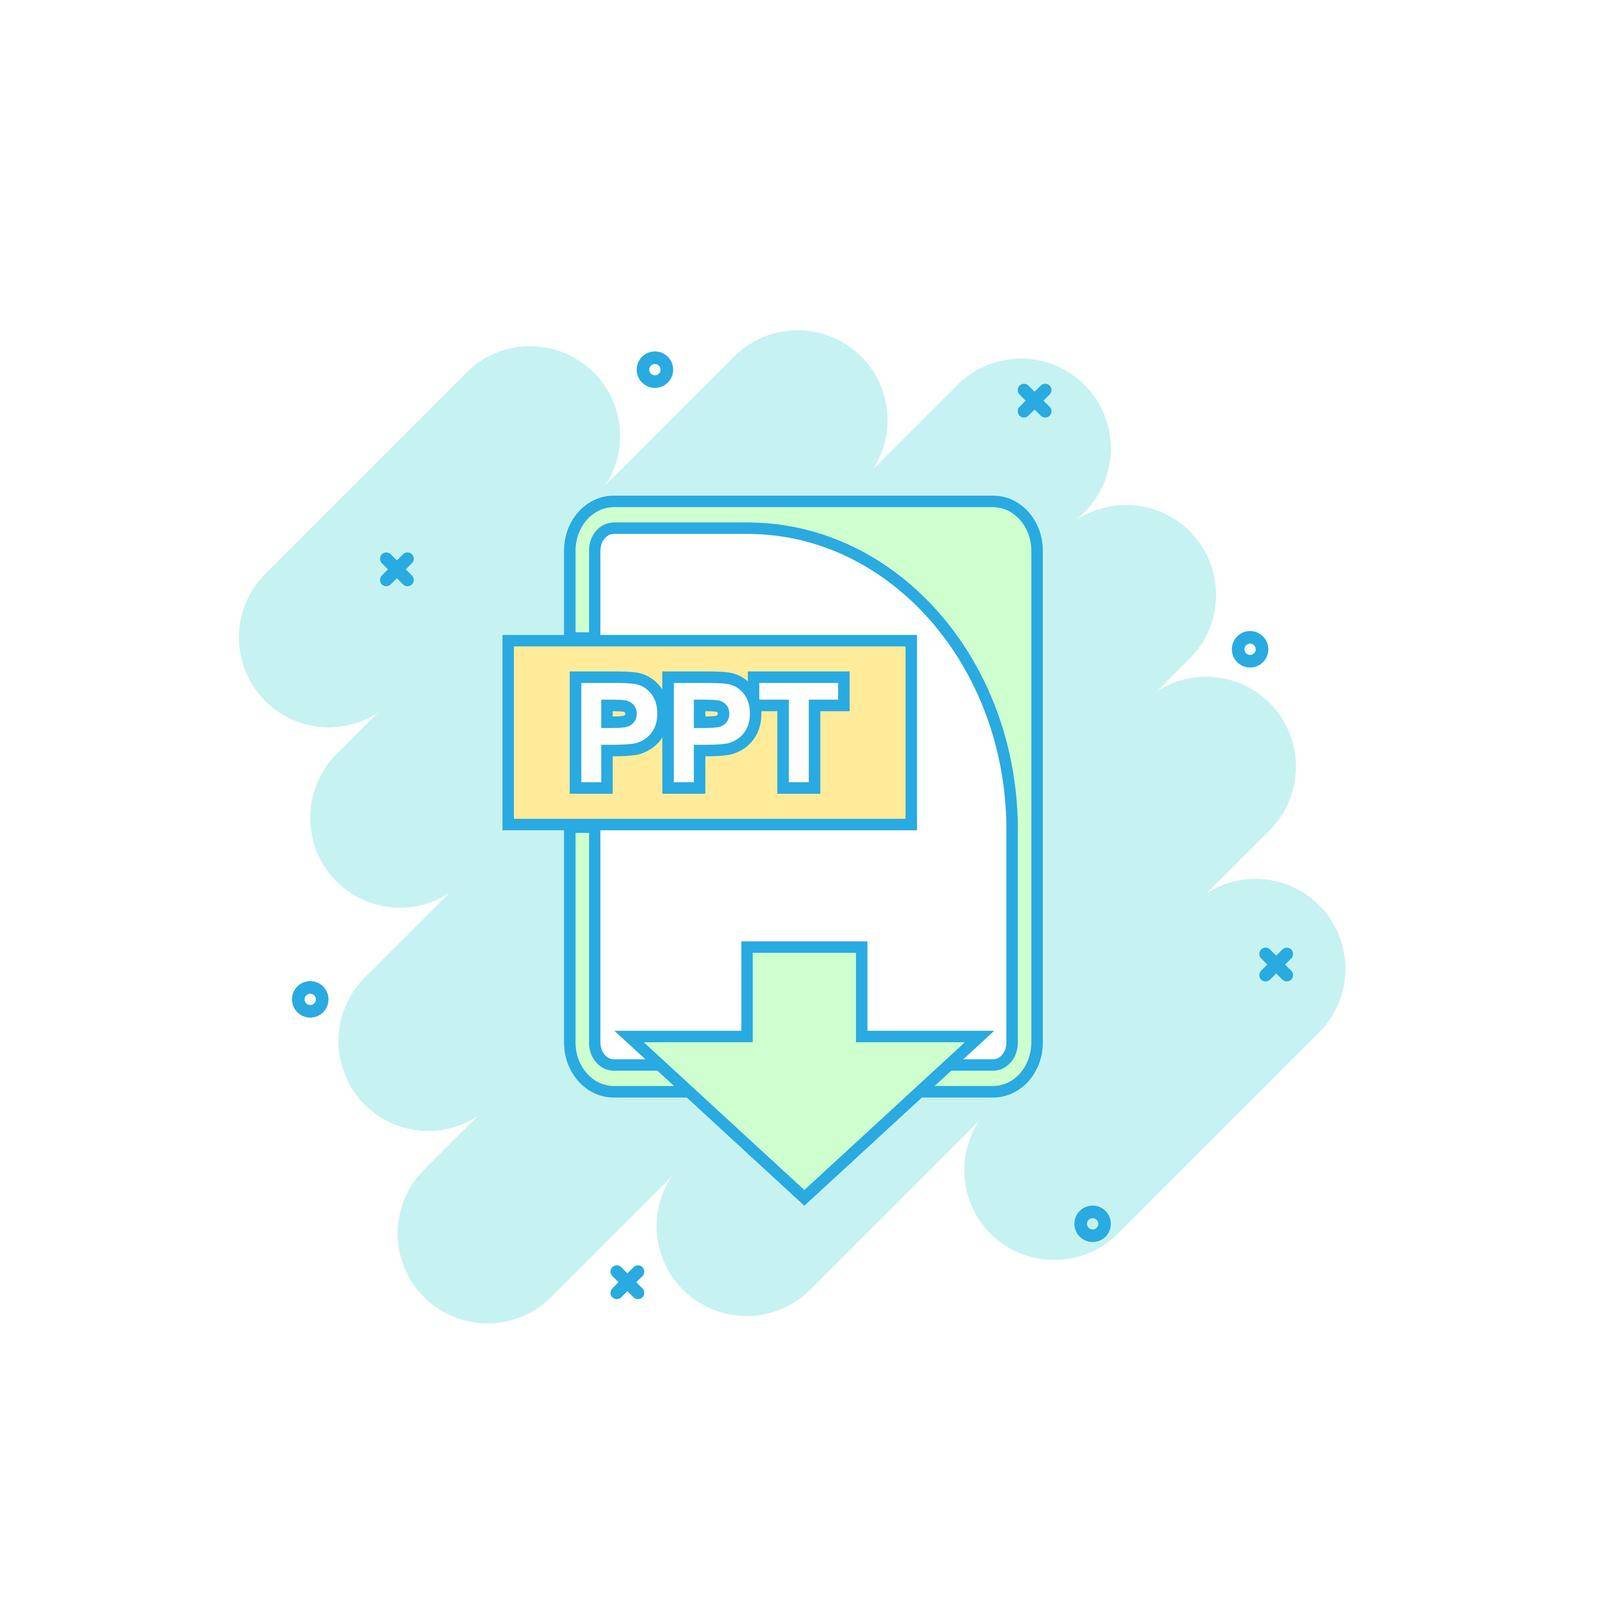 Cartoon colored PPT file icon in comic style. Ppt download illustration pictogram. Document splash business concept. by LysenkoA